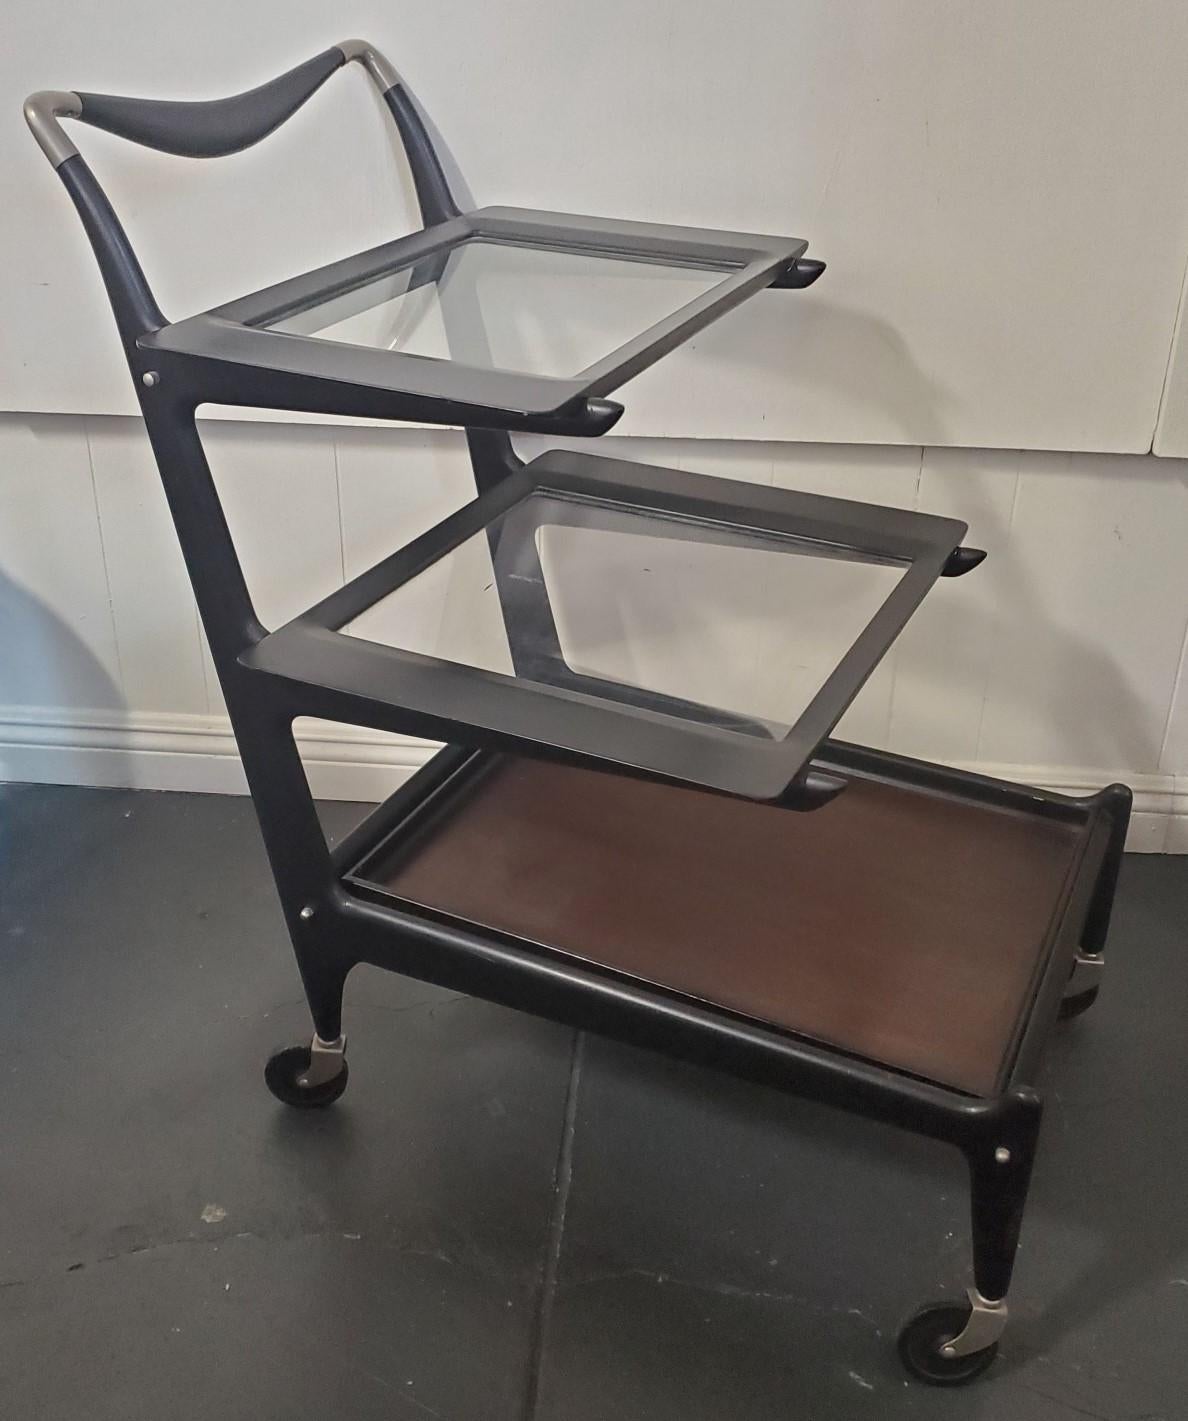 Italian modern tea trolley bar cart by Cesare Lacca 1950s with removable tiers. Each tier fits exactly in the position it is removed from The top 2 tiers have a plexy-glass like transparent material and the bottom tier is made from wood with a dark